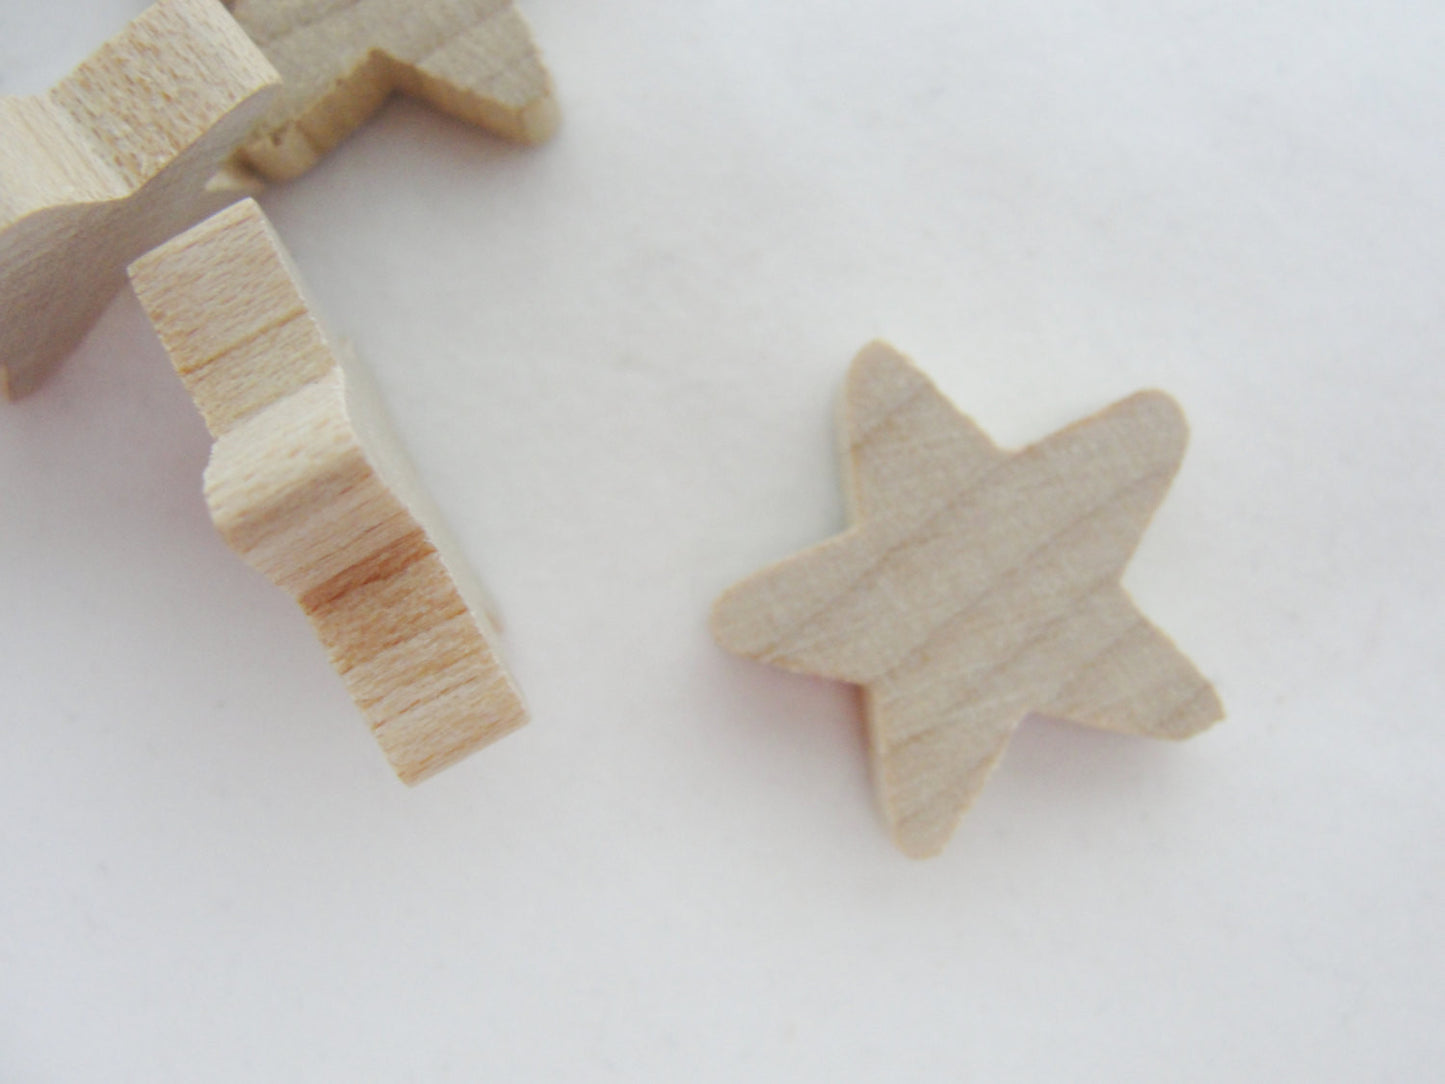 Traditional wooden star 3/4 inch (3/4", .75") set of 12 - Wood parts - Craft Supply House